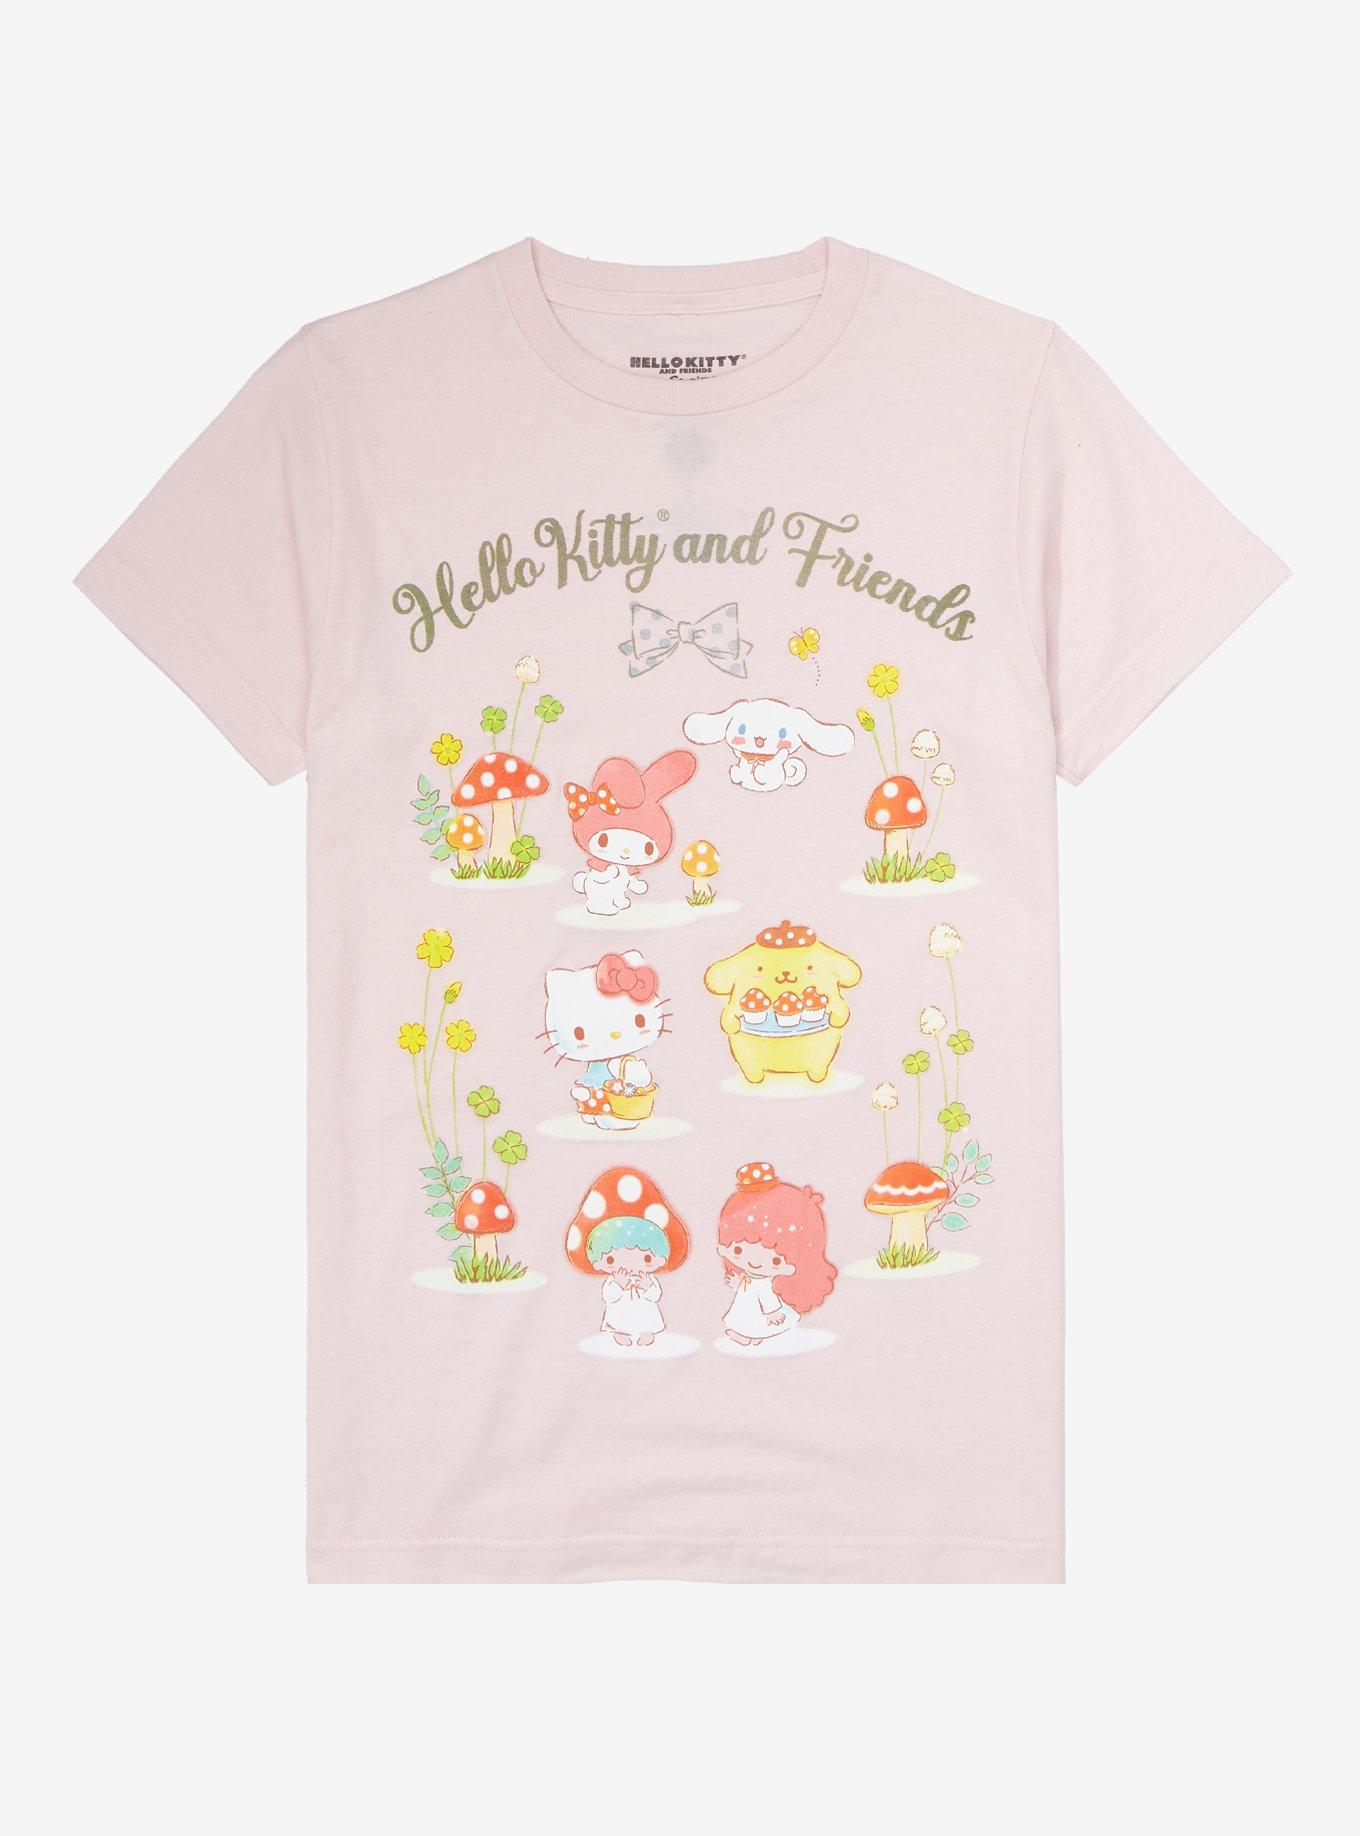 Hello Kitty Tops and T-shirts Online - Buy Clothes & Shoes at